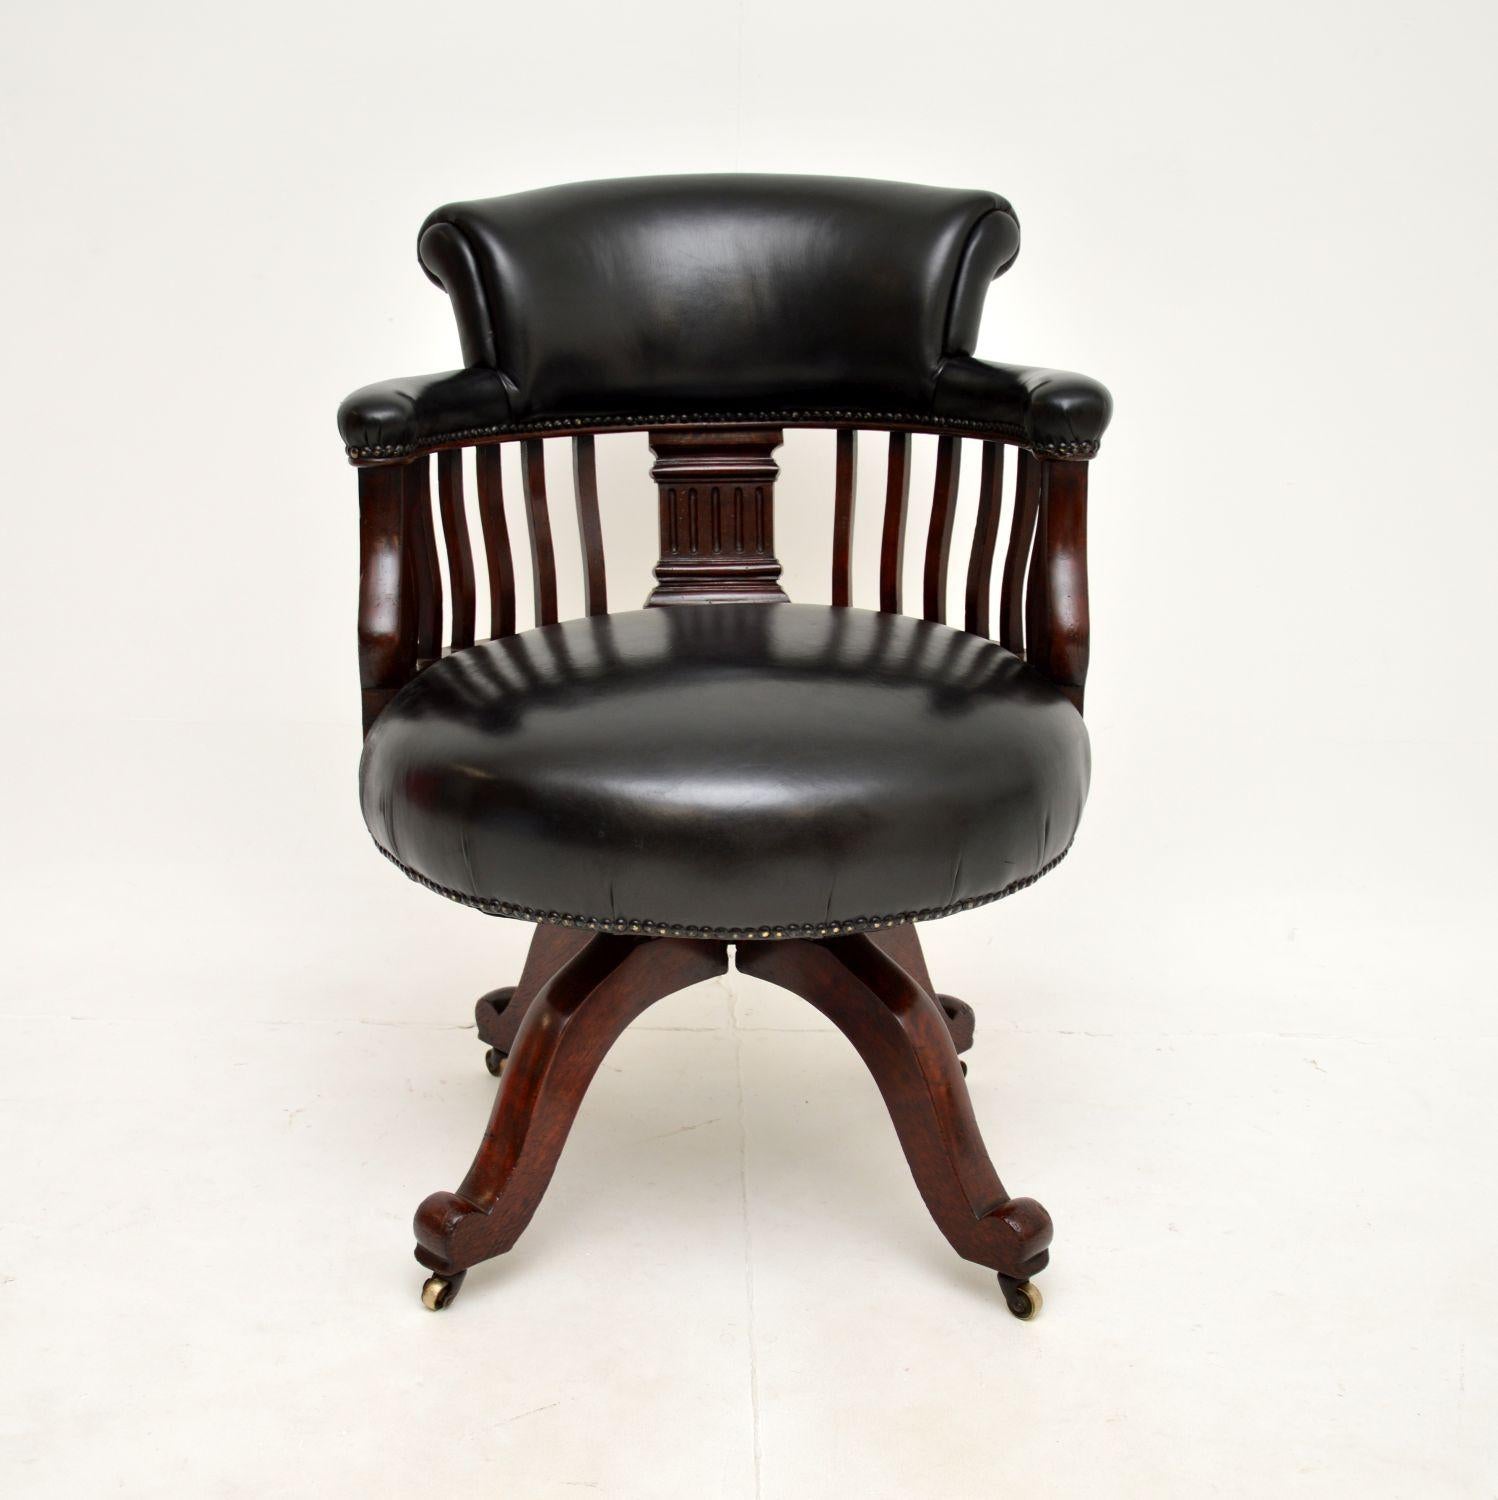 A superb antique Victorian leather swivel desk chair. This was made in England, it dates from around the 1870-1890 period.

The quality is outstanding, this is a great size and is very comfortable. The frame is dark stained solid oak, which is